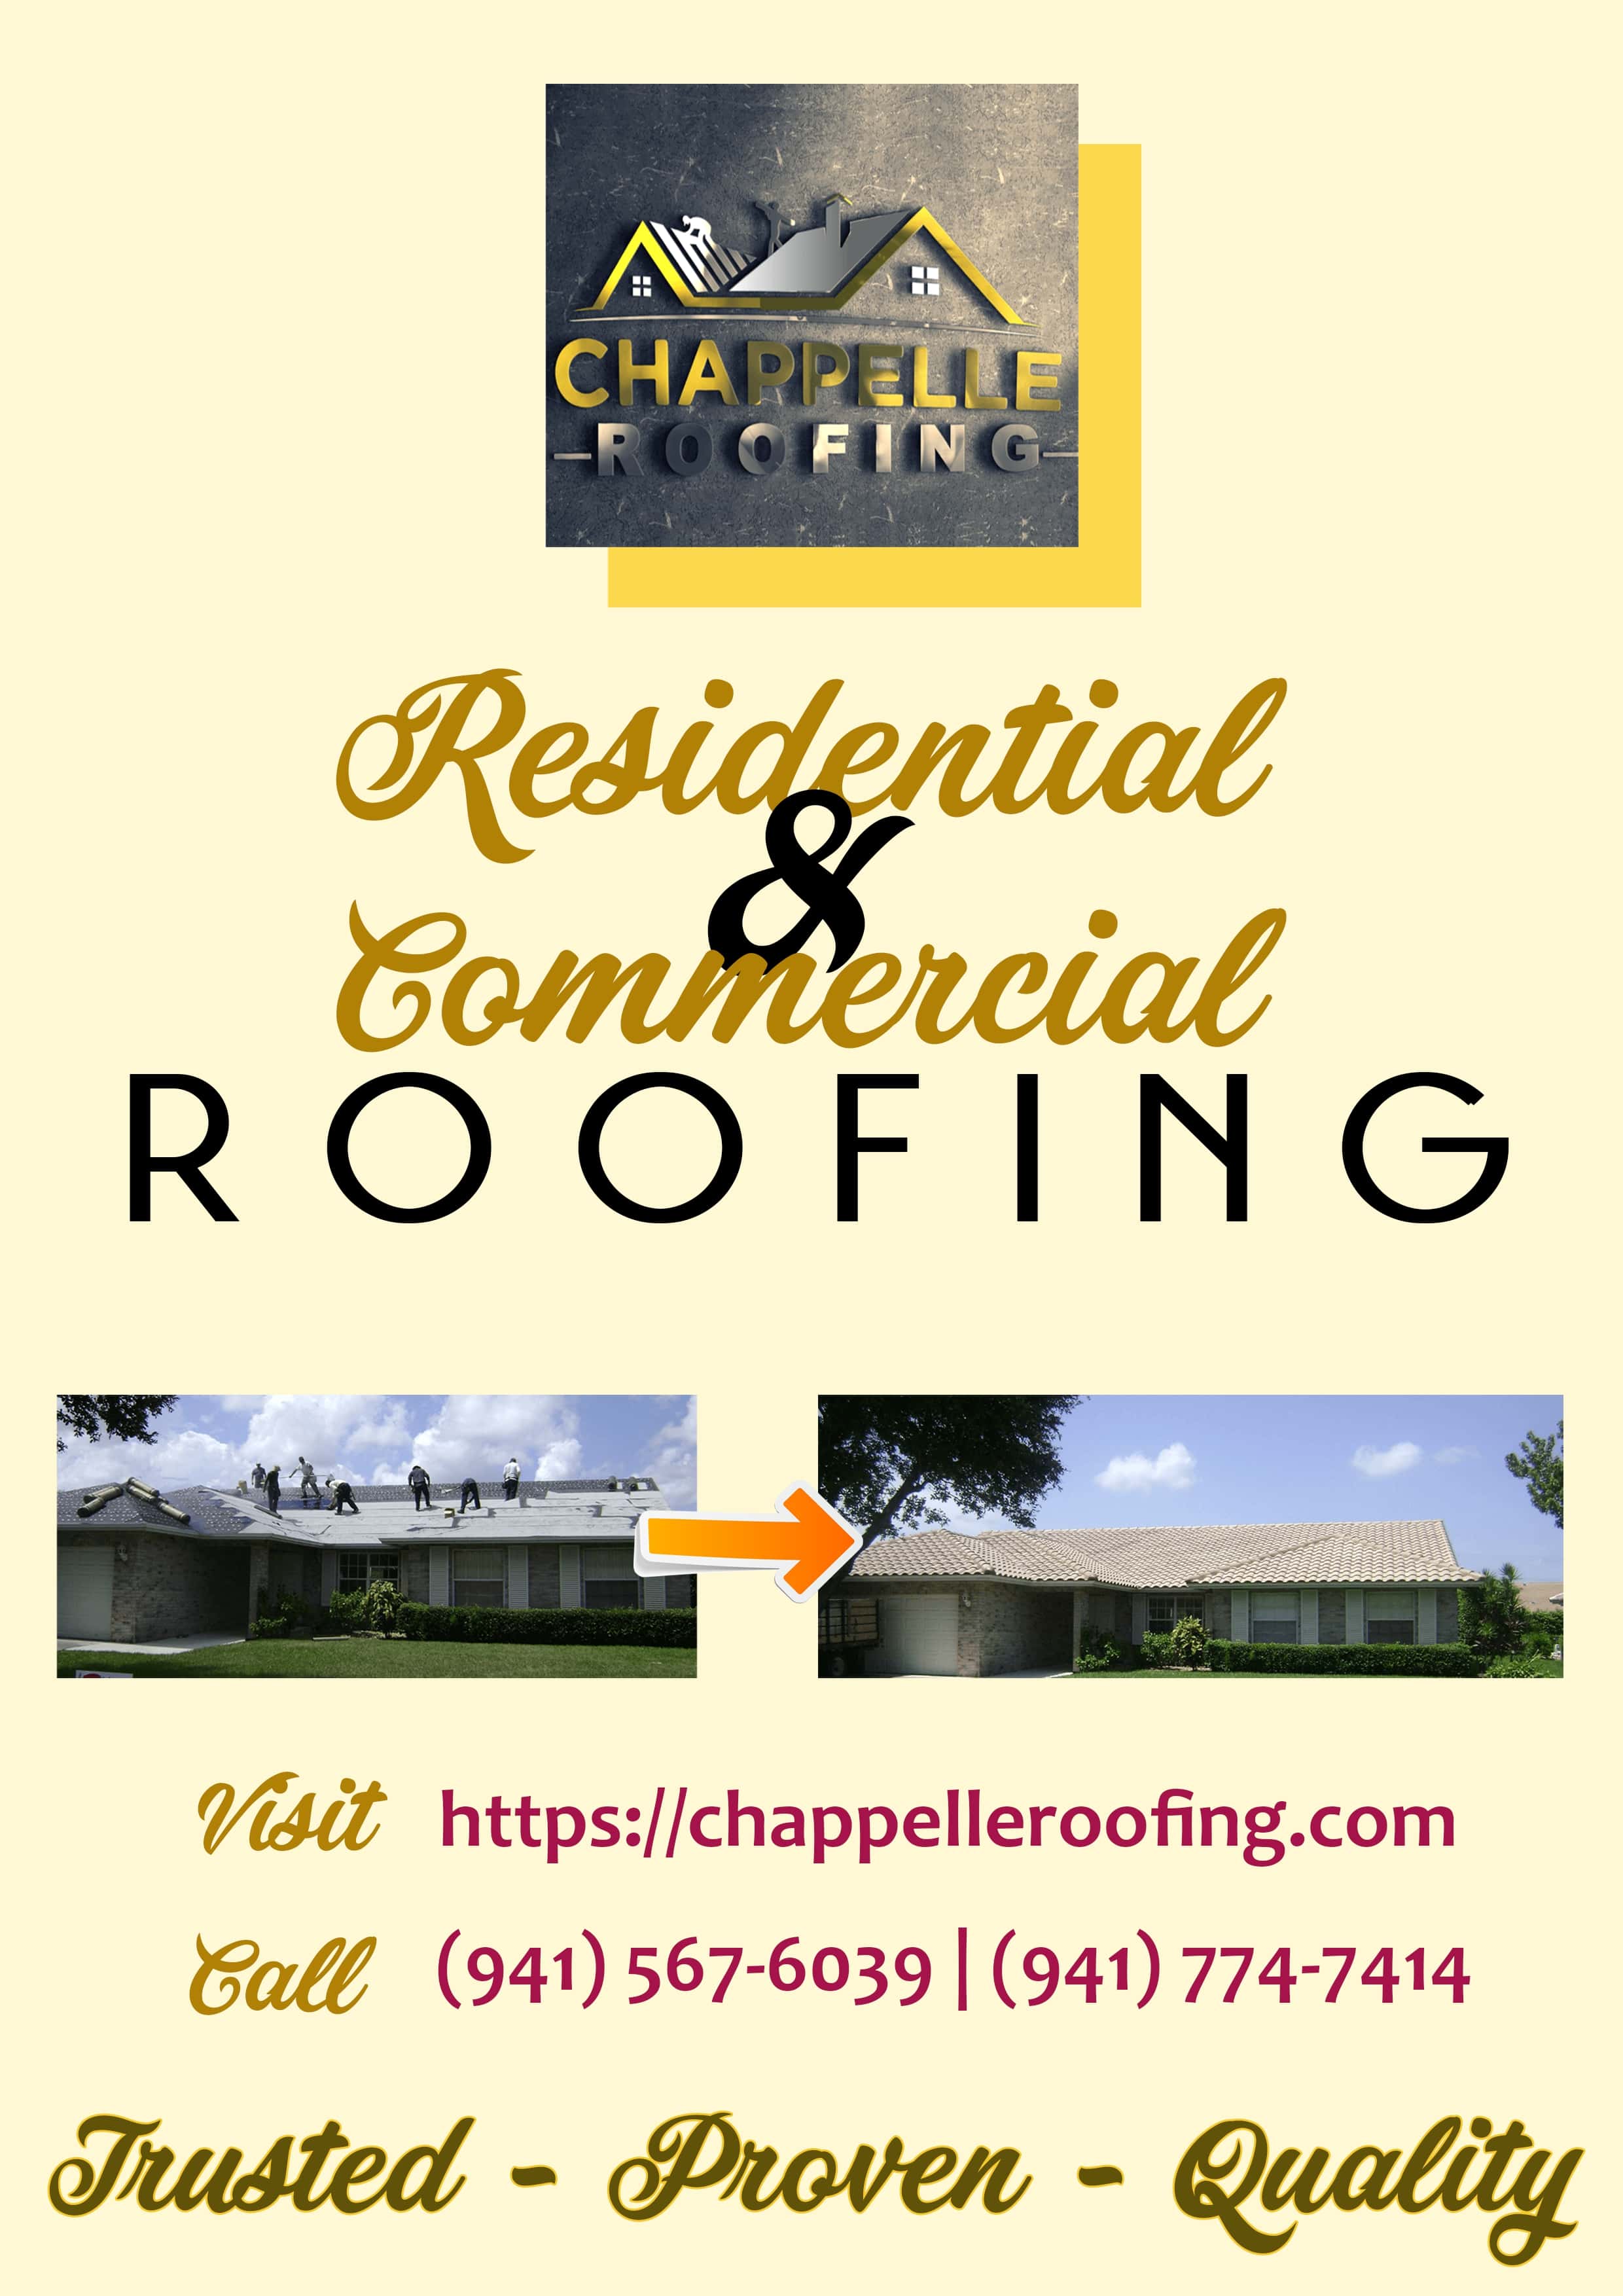 Chappelle Roofing: Commercial and Residential Roofing